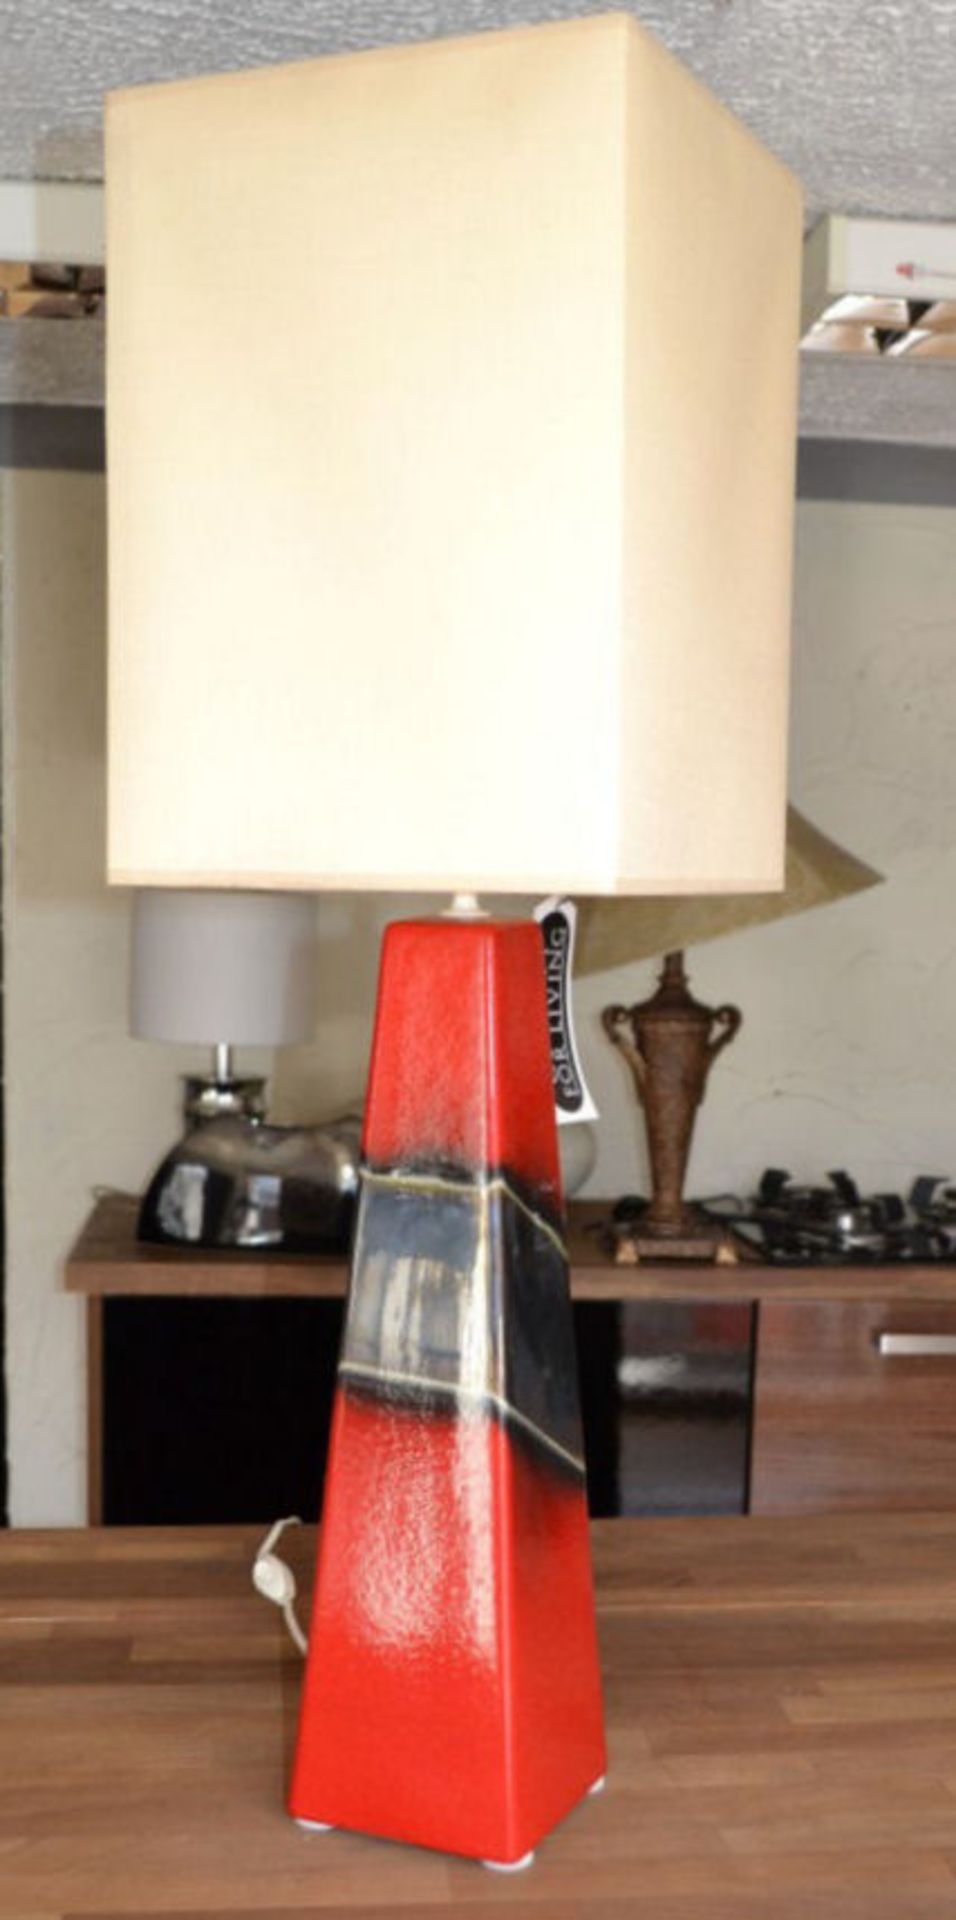 1 x Tall Contemporary Red And Dark Silver Lamp